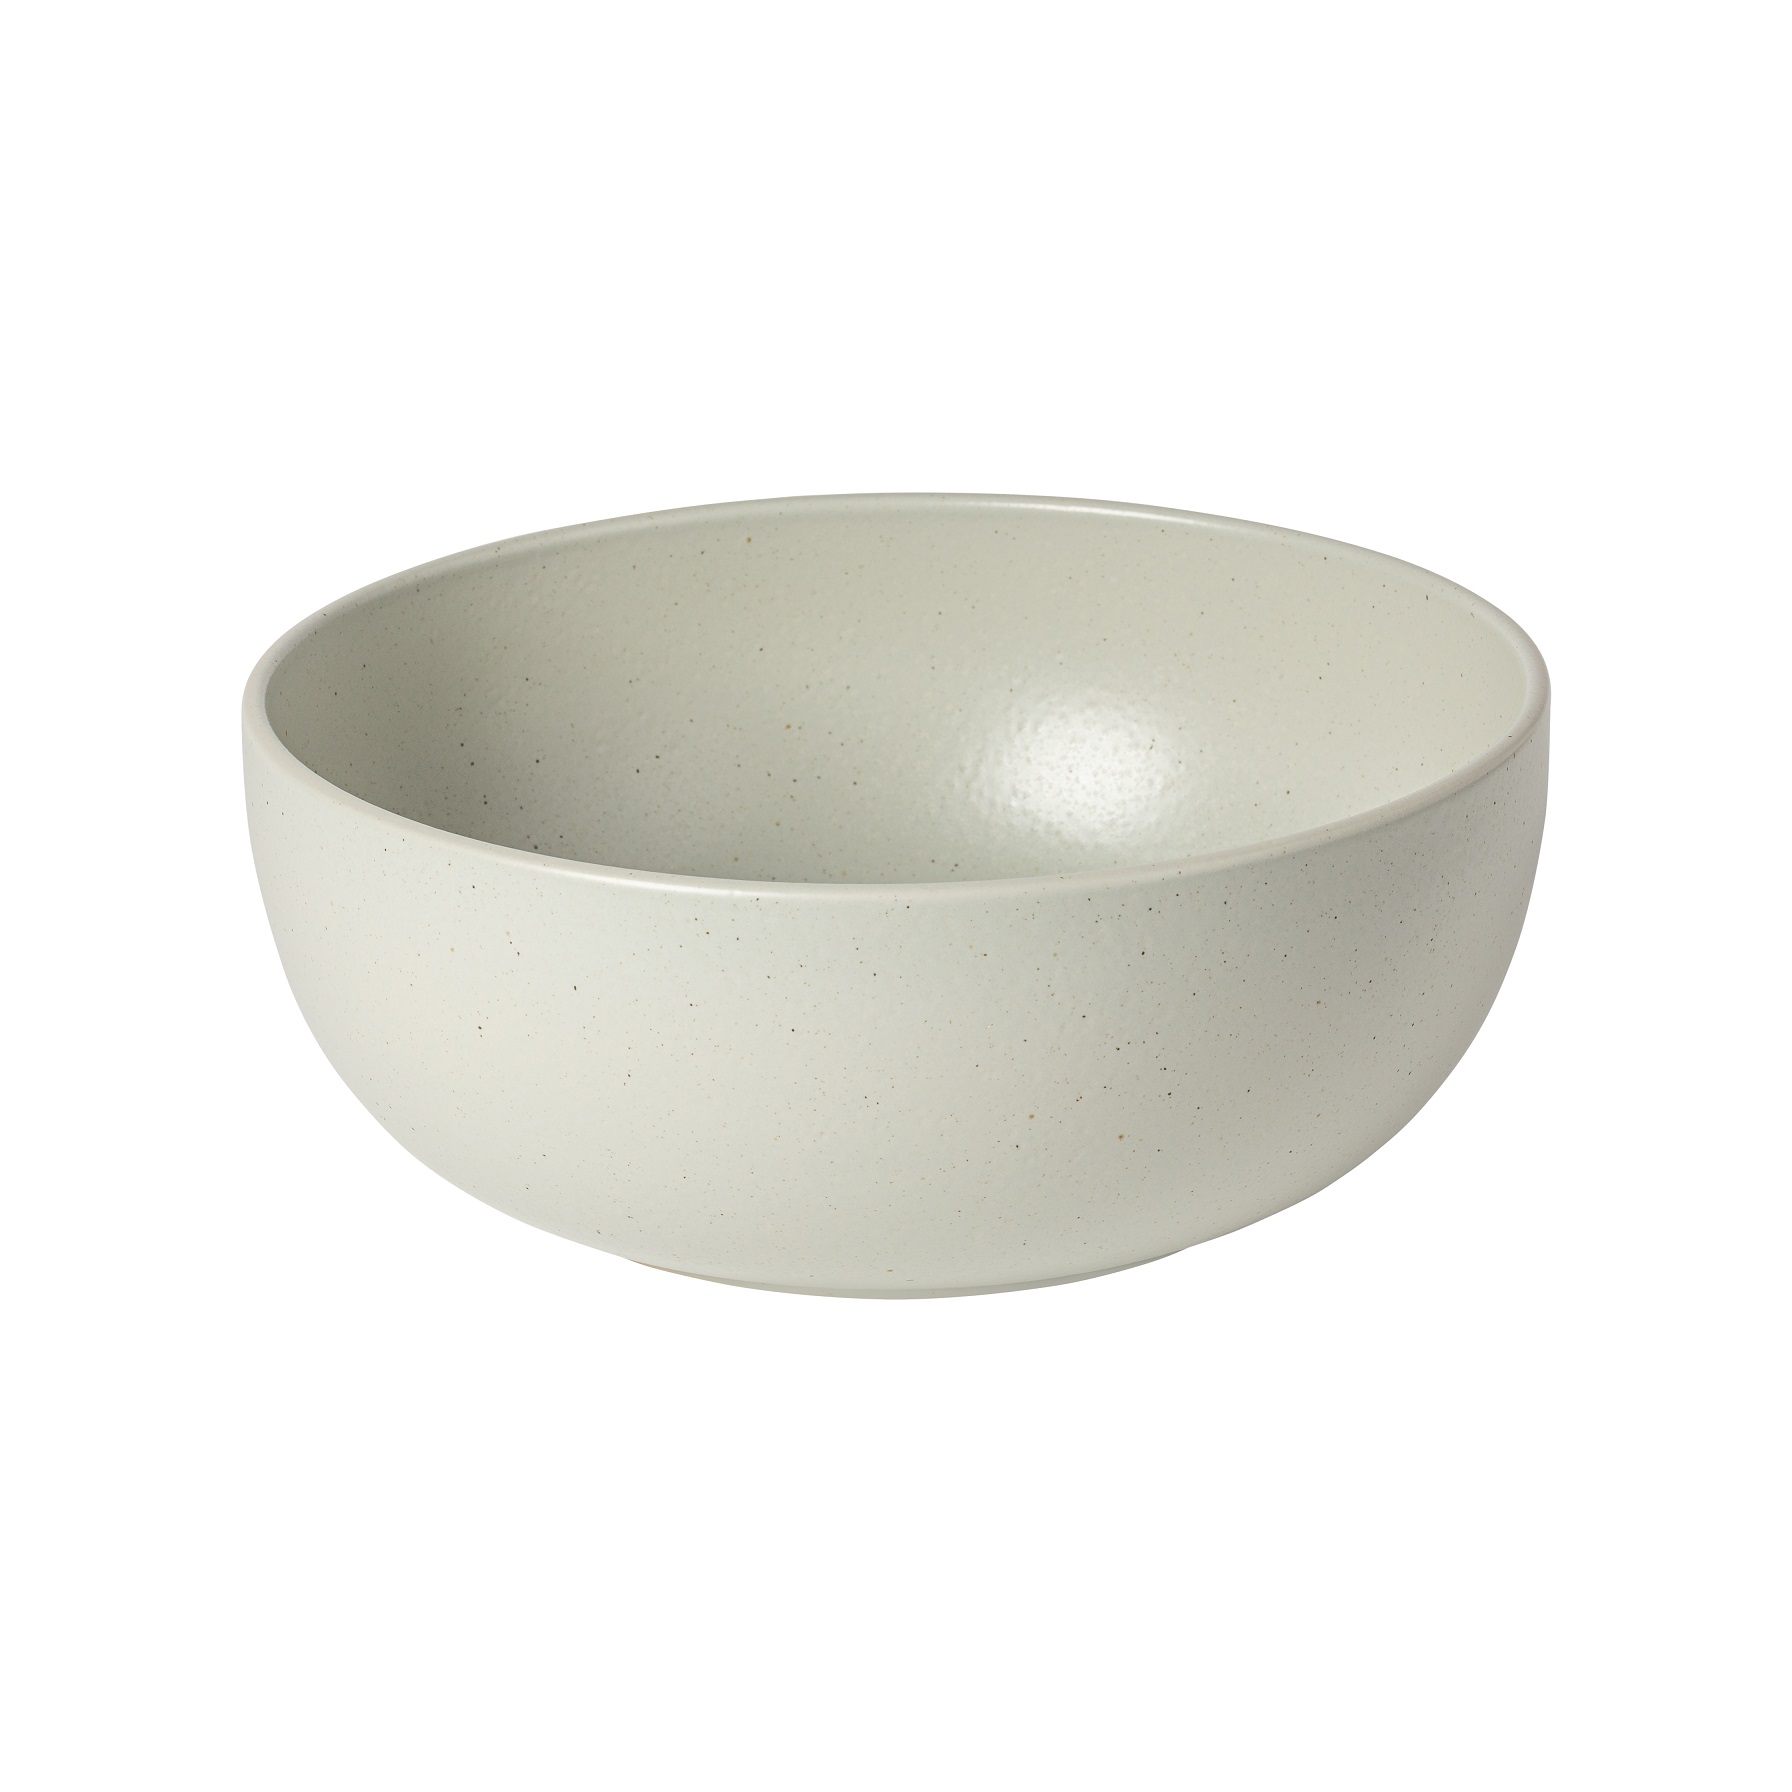 Pacifica Oyster Grey Serving Bowl 25cm Gift